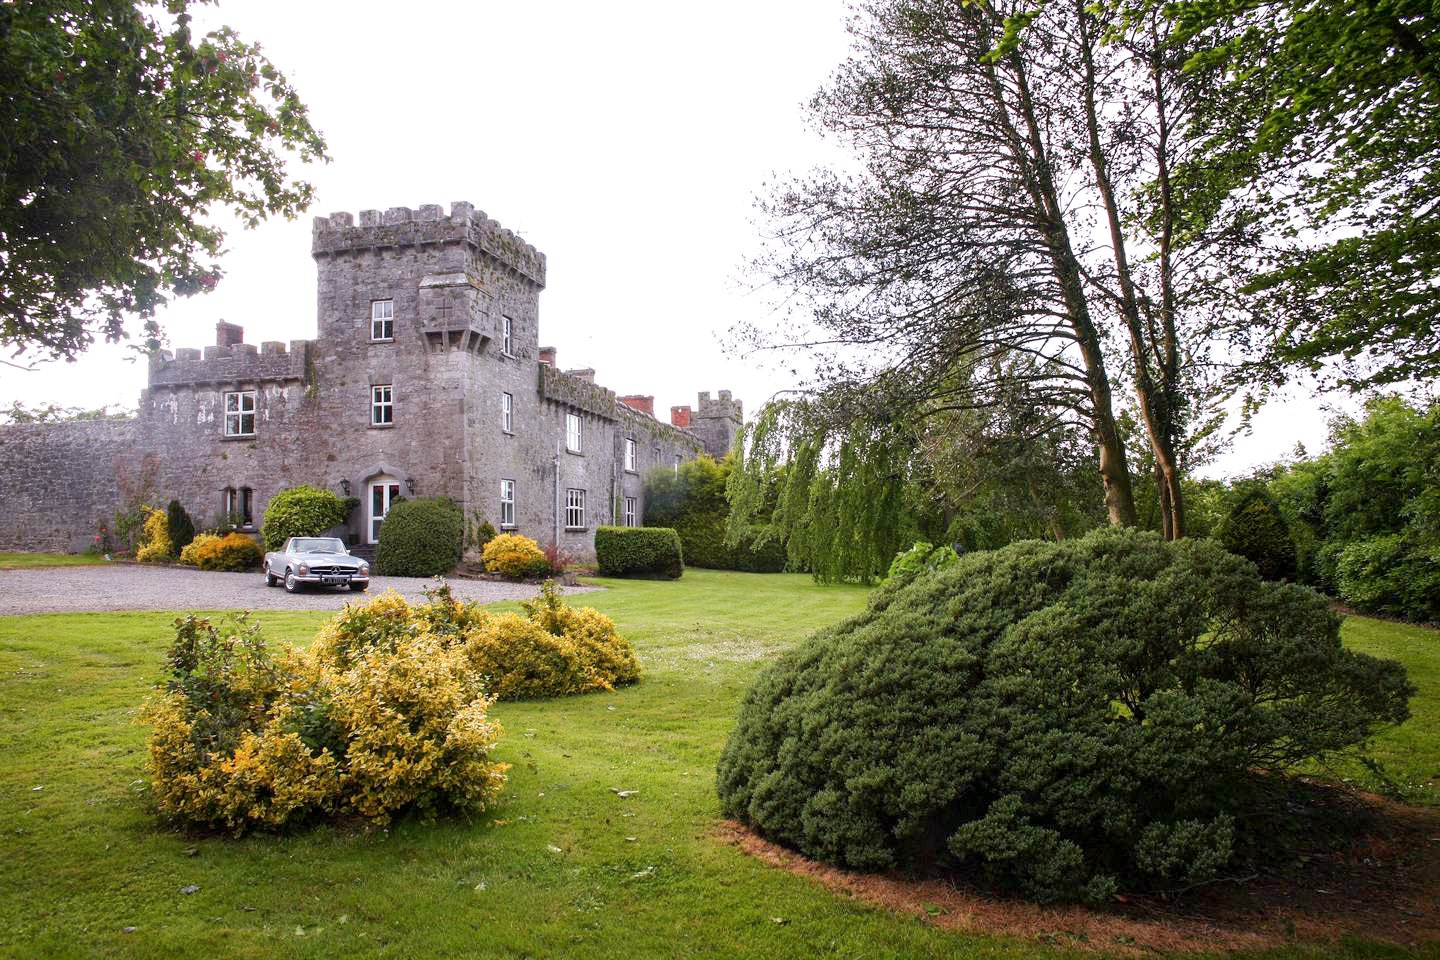 This romantic, gothic-style castle in Ireland dates back to the 12th century. It has been restored over the years and guests can even <a href="https://www.cntraveler.com/gallery/the-best-airbnbs-around-the-world-for-a-throwing-a-micro-wedding?mbid=synd_msn_rss&utm_source=msn&utm_medium=syndication">get married here</a>. Located two and a half hours southwest of Dublin, this castle is ideal for disconnecting and fully immersing yourself in this historic retreat. Cozy up by the fireplace during the colder months or enjoy the warm summer on the castle's outdoor patio. $488, Airbnb (Starting Price). <a href="https://www.airbnb.com/rooms/3602779?irgwc=1&irclid=2QtXMuWh4xyIR4lR3A15t2IMUkGTDmwak1cN0A0&ircid=4273&sharedid=&af=49497874&iratid=9627&c=.pi73.pk4273_1297866&irparam1=&source_impression_id=p3_1647363407_ijvB2Ero%2BV%2BuIzjr%27">Get it now!</a><p>Sign up to receive the latest news, expert tips, and inspiration on all things travel</p><a href="https://www.cntraveler.com/newsletter/the-daily?sourceCode=msnsend">Inspire Me</a>